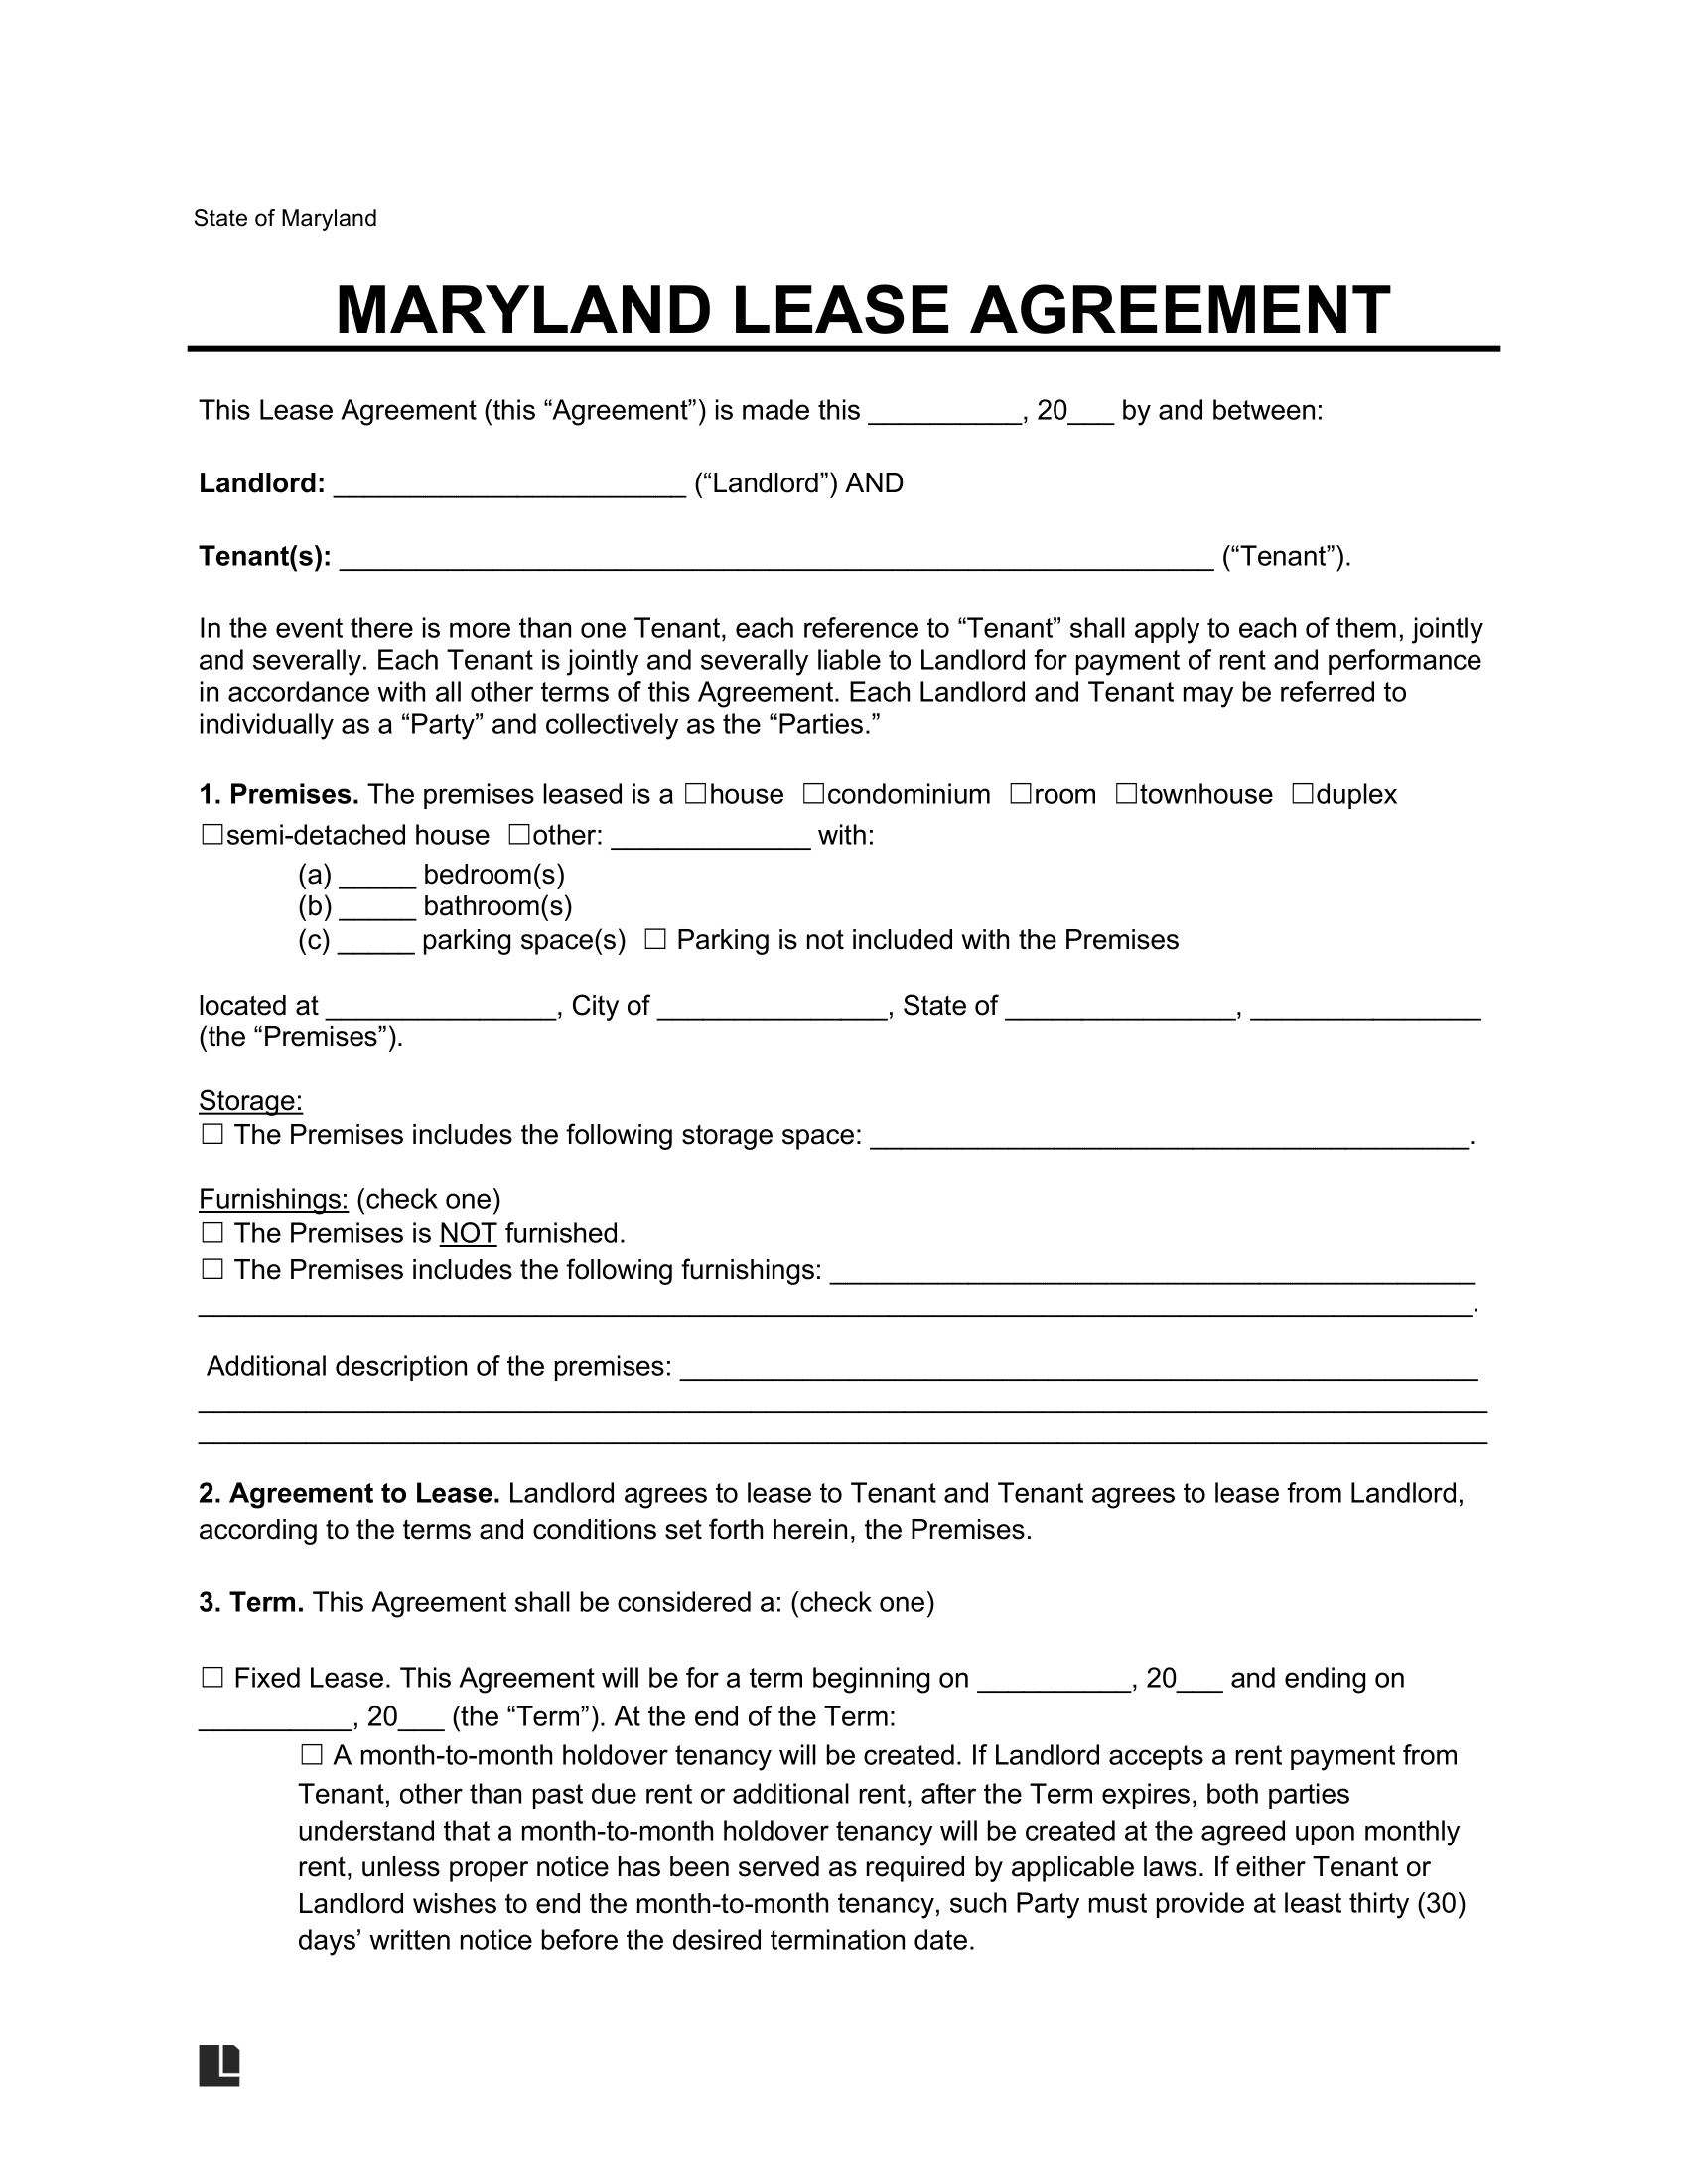 maryland lease agreement